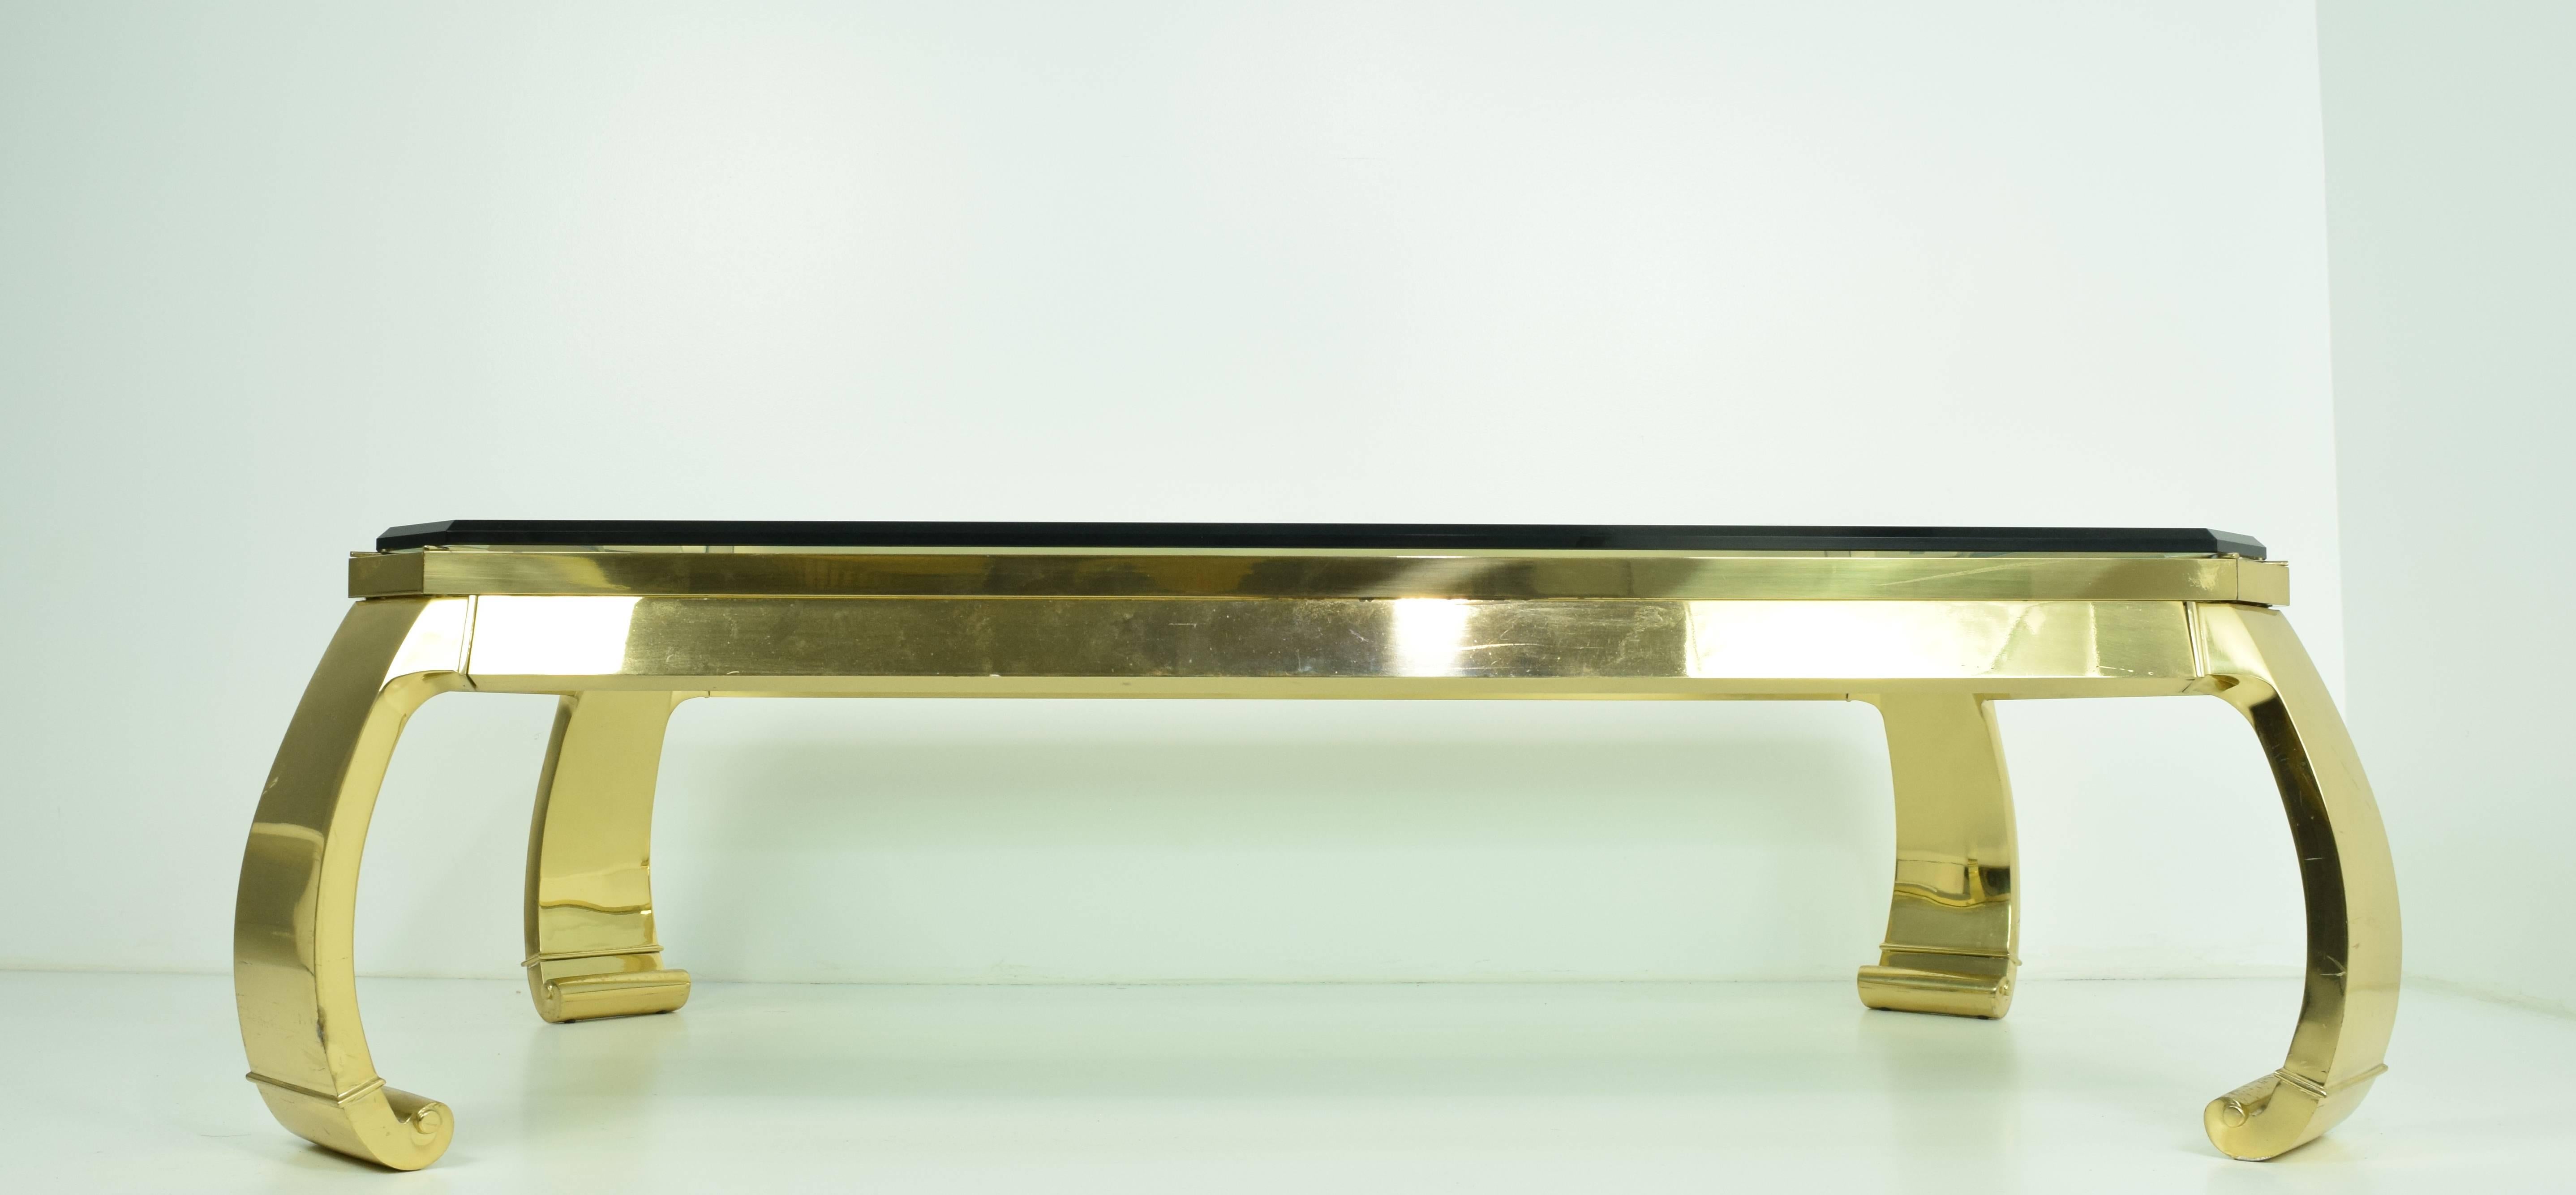 A large 1970s solid brass coffee table in the style of designer Karl Springer. The table features a thick 3/4 inch chamfered glass top with cut corners and Ming style curved legs. .Heavy brass base with thick glass top, made in Italy. 